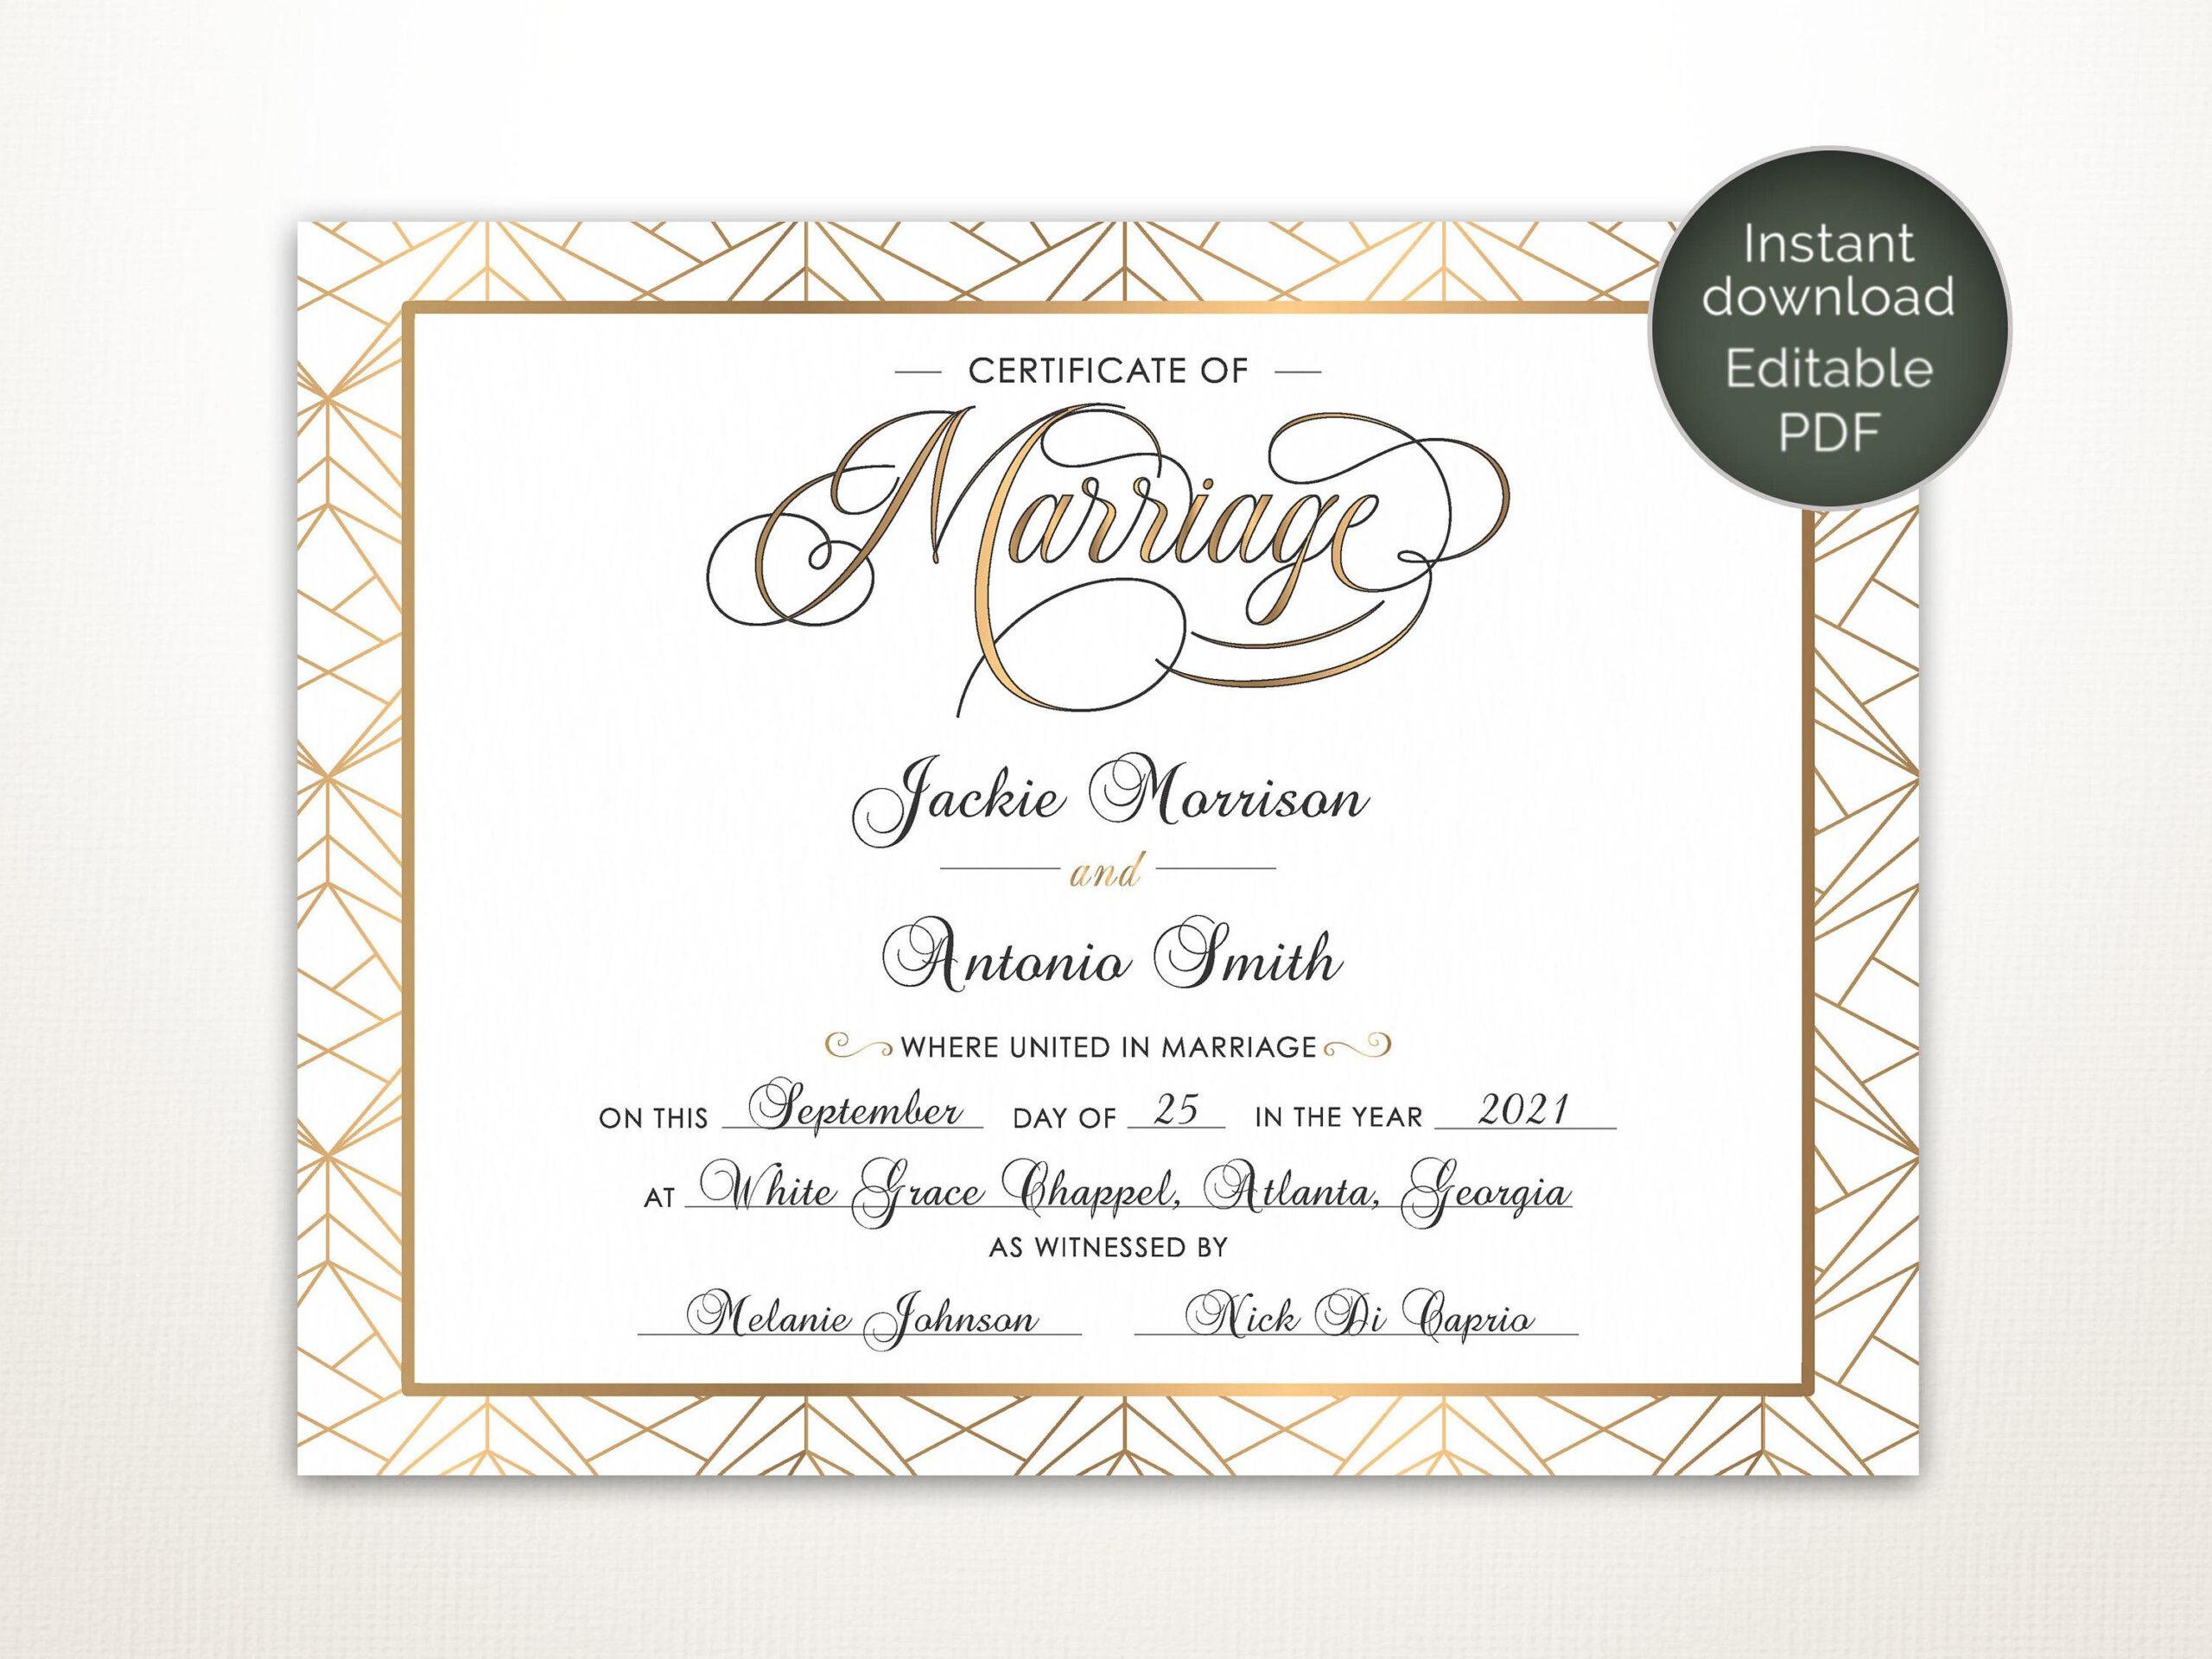 Modern Wedding Certificate, Printable Certificate Of Intended For Update Certificates That Use Certificate Templates